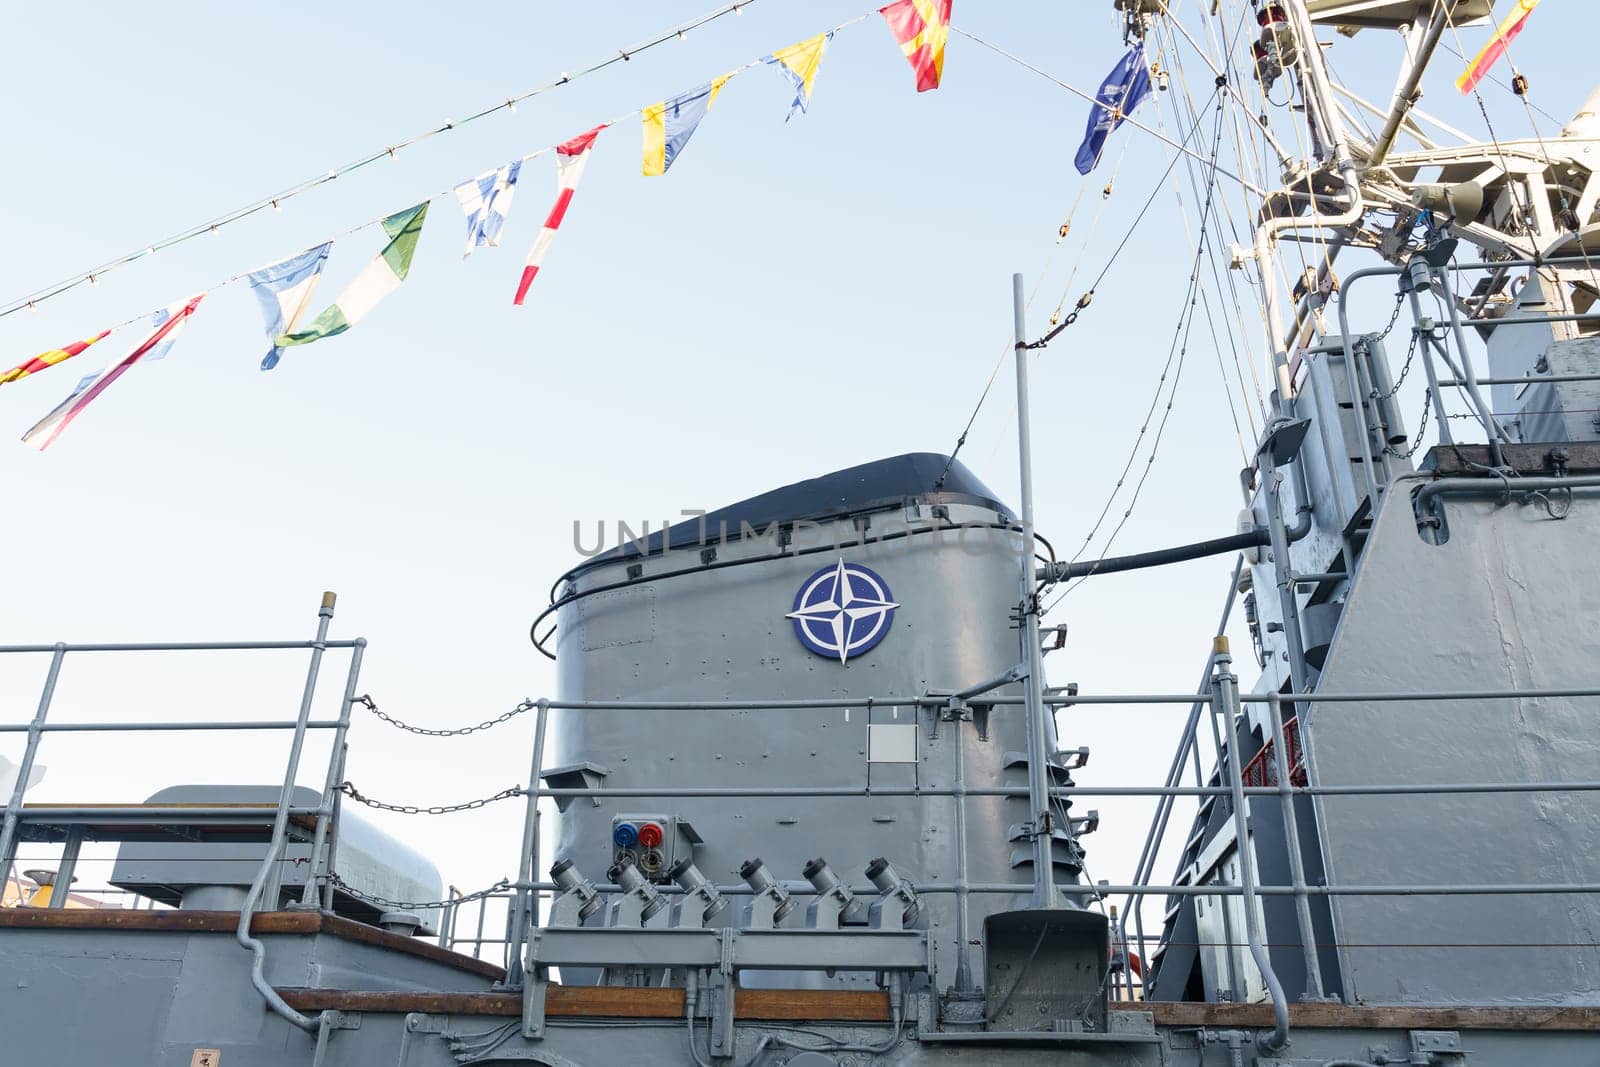 Naval Ship Deck Adorned With Signal Flags During a Docked Ceremony by Sd28DimoN_1976